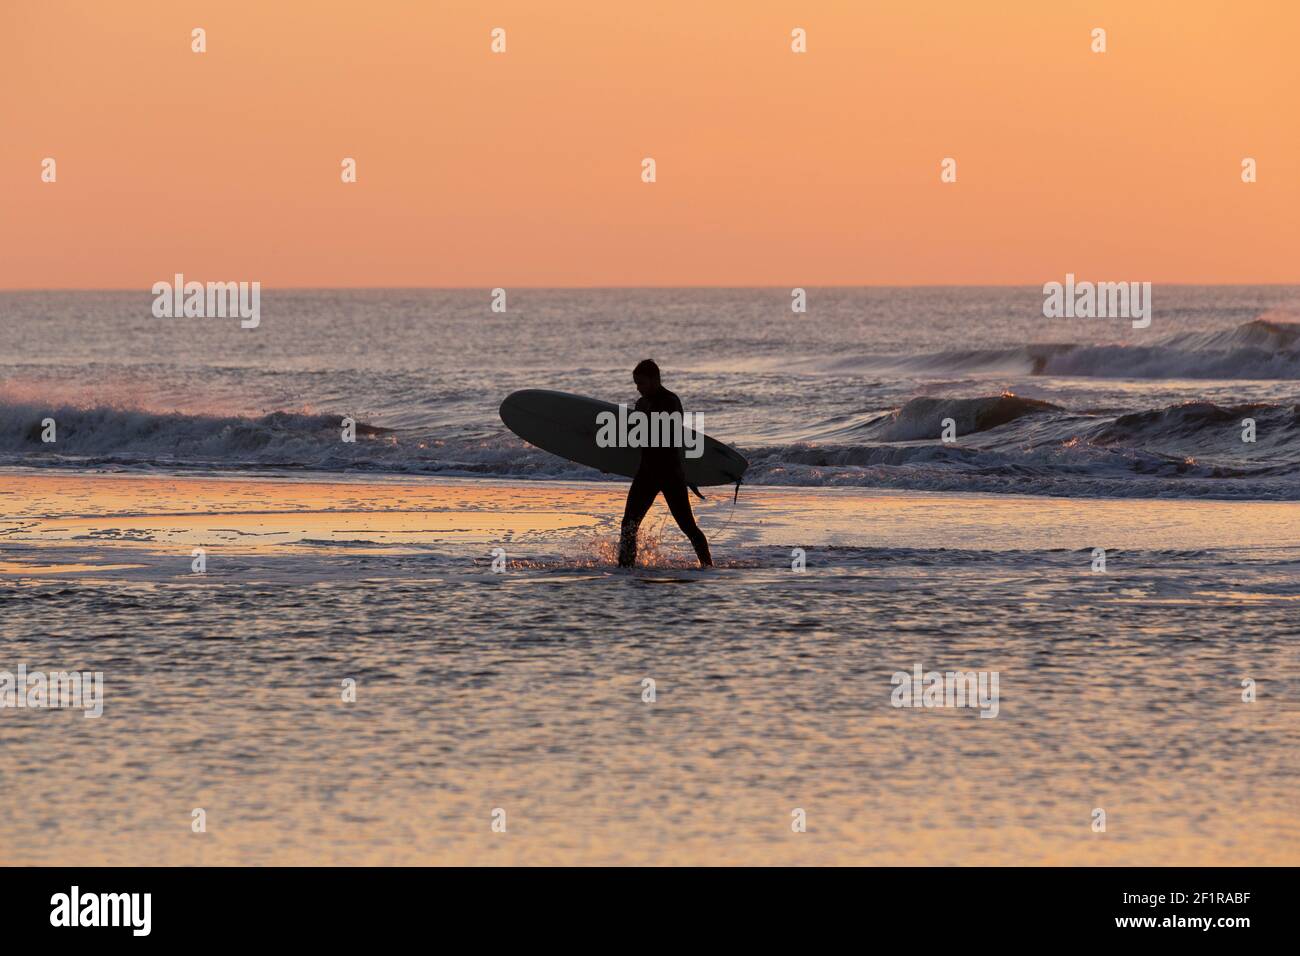 A surfer walking along the shore at sunset Stock Photo